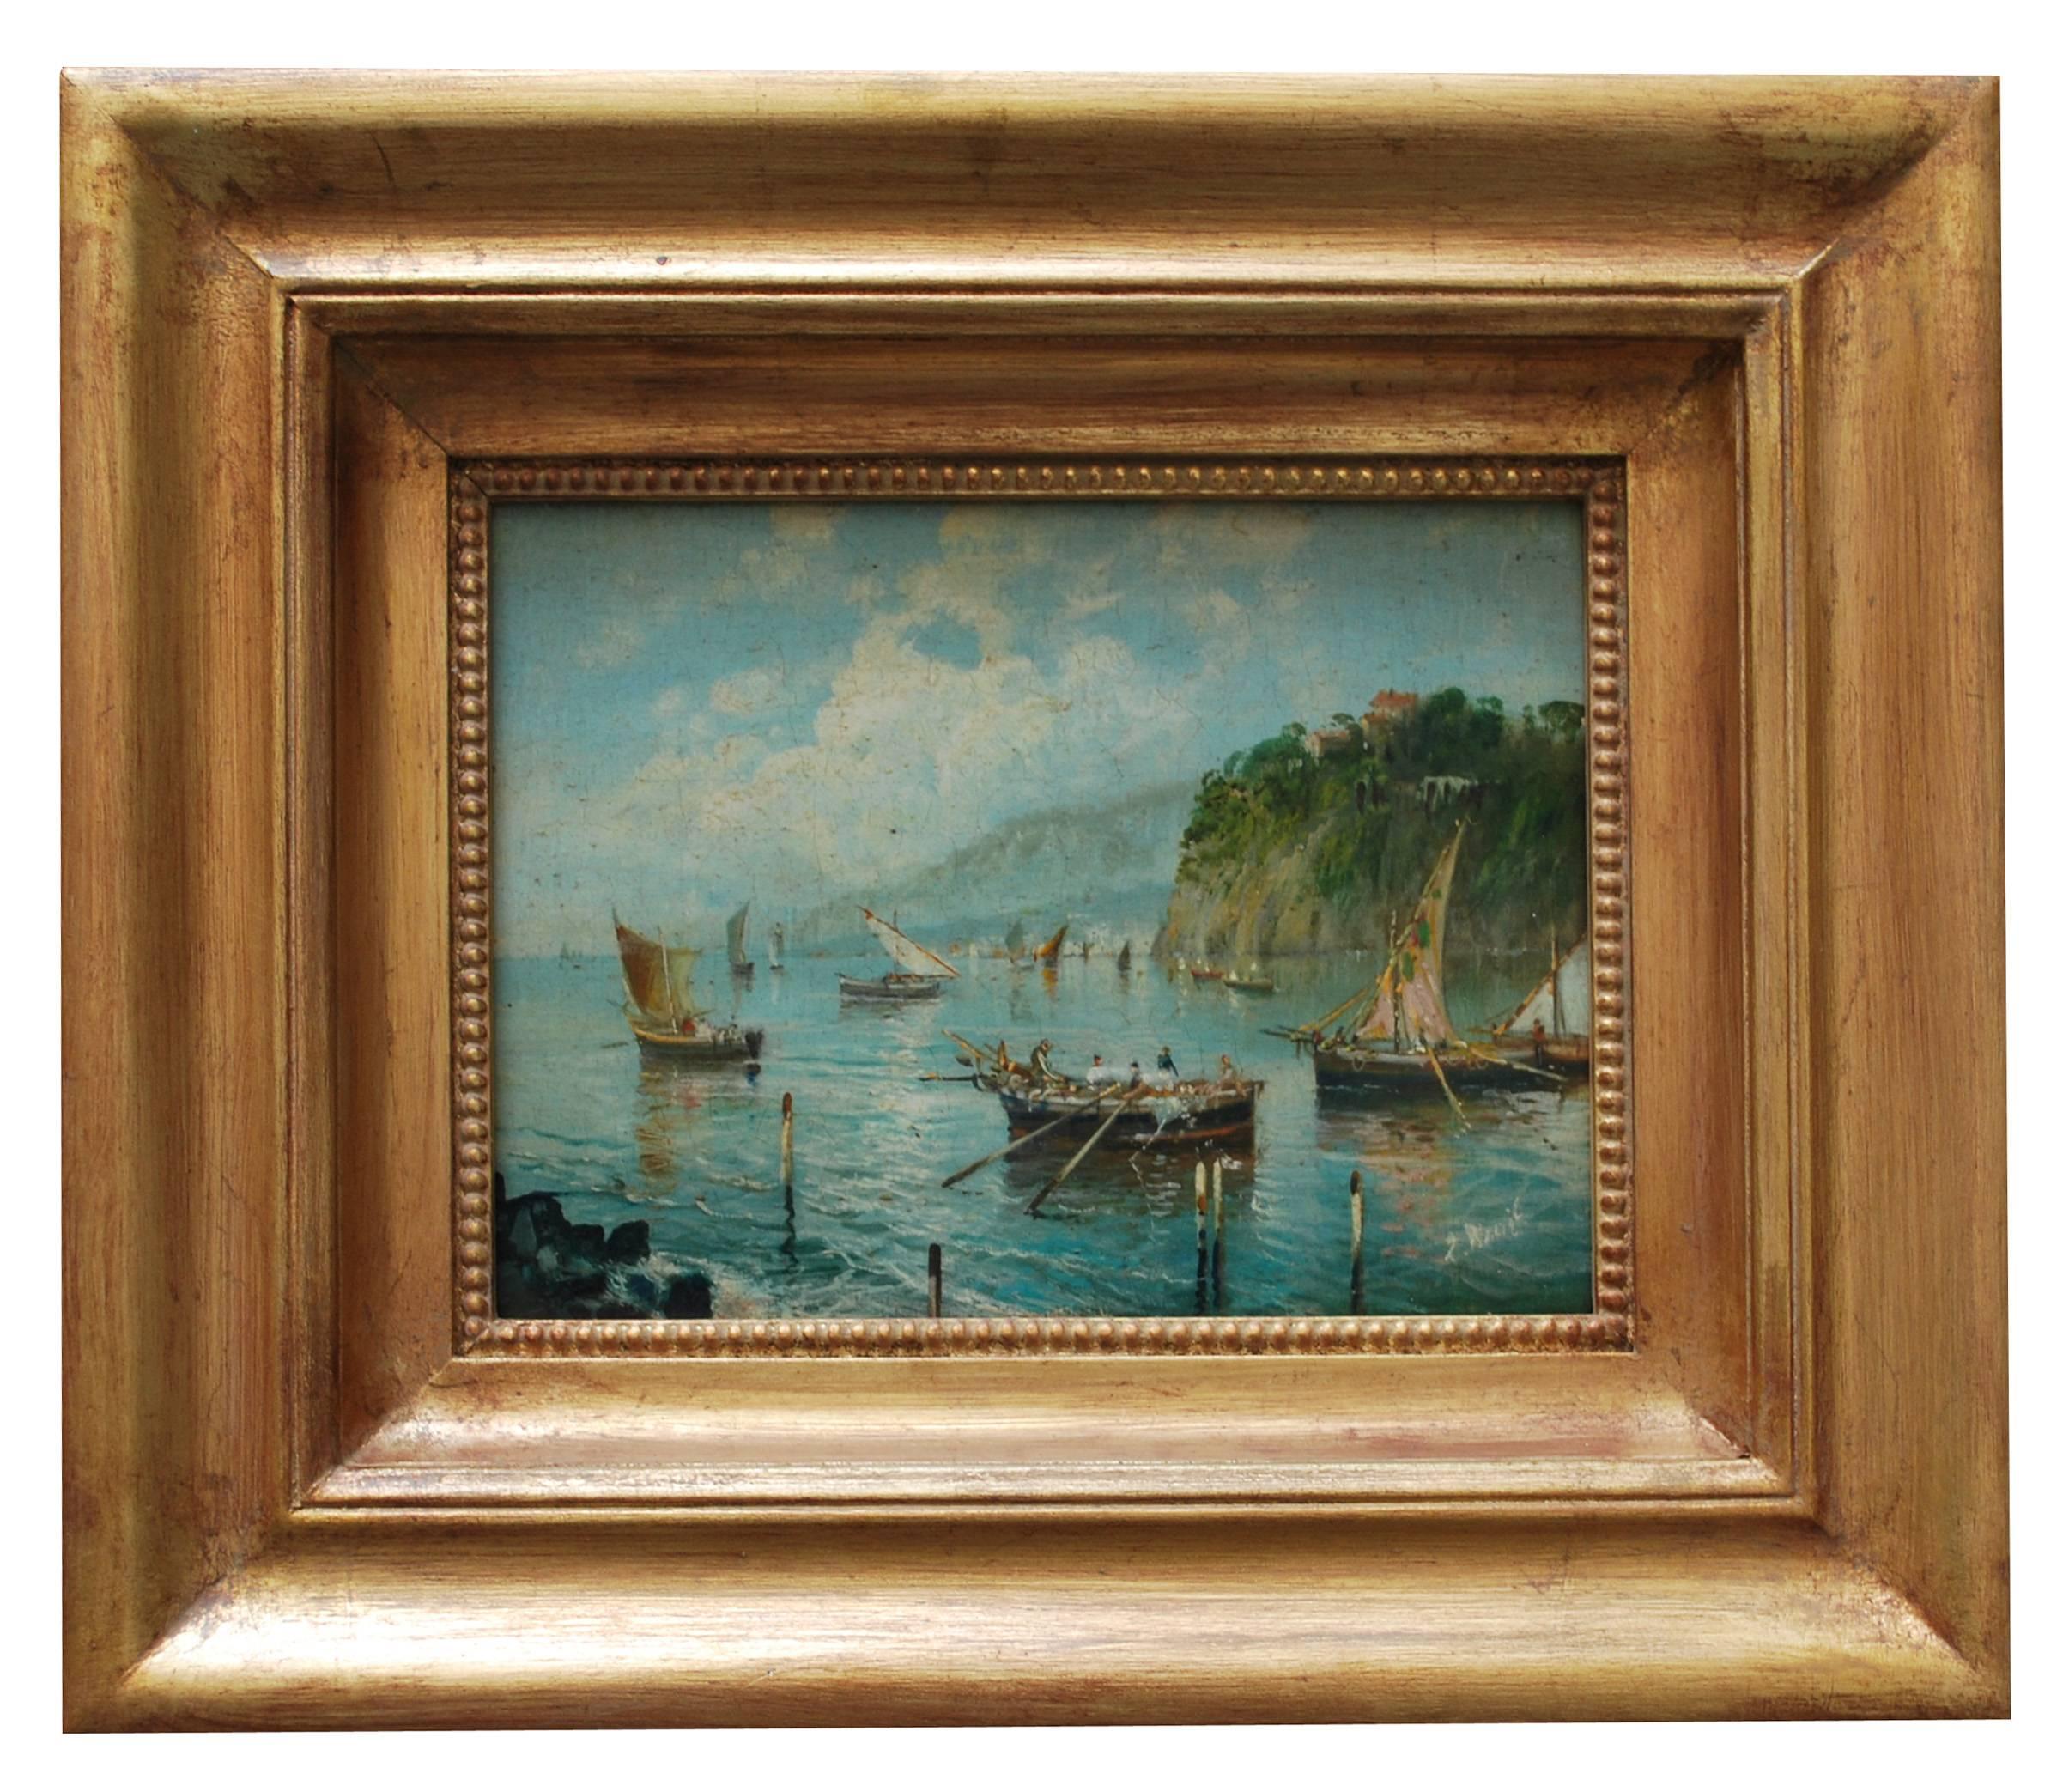 Marine - Luigi Basile Italia 2008 - Oil on board cm. 18x24 
Gold leaf gilded wooden frame mis. cm. 34x40
Luigi Basile's painting is an extraordinary work of Italian landscape painting. 
Basile drew inspiration from the artists of the Posillipo